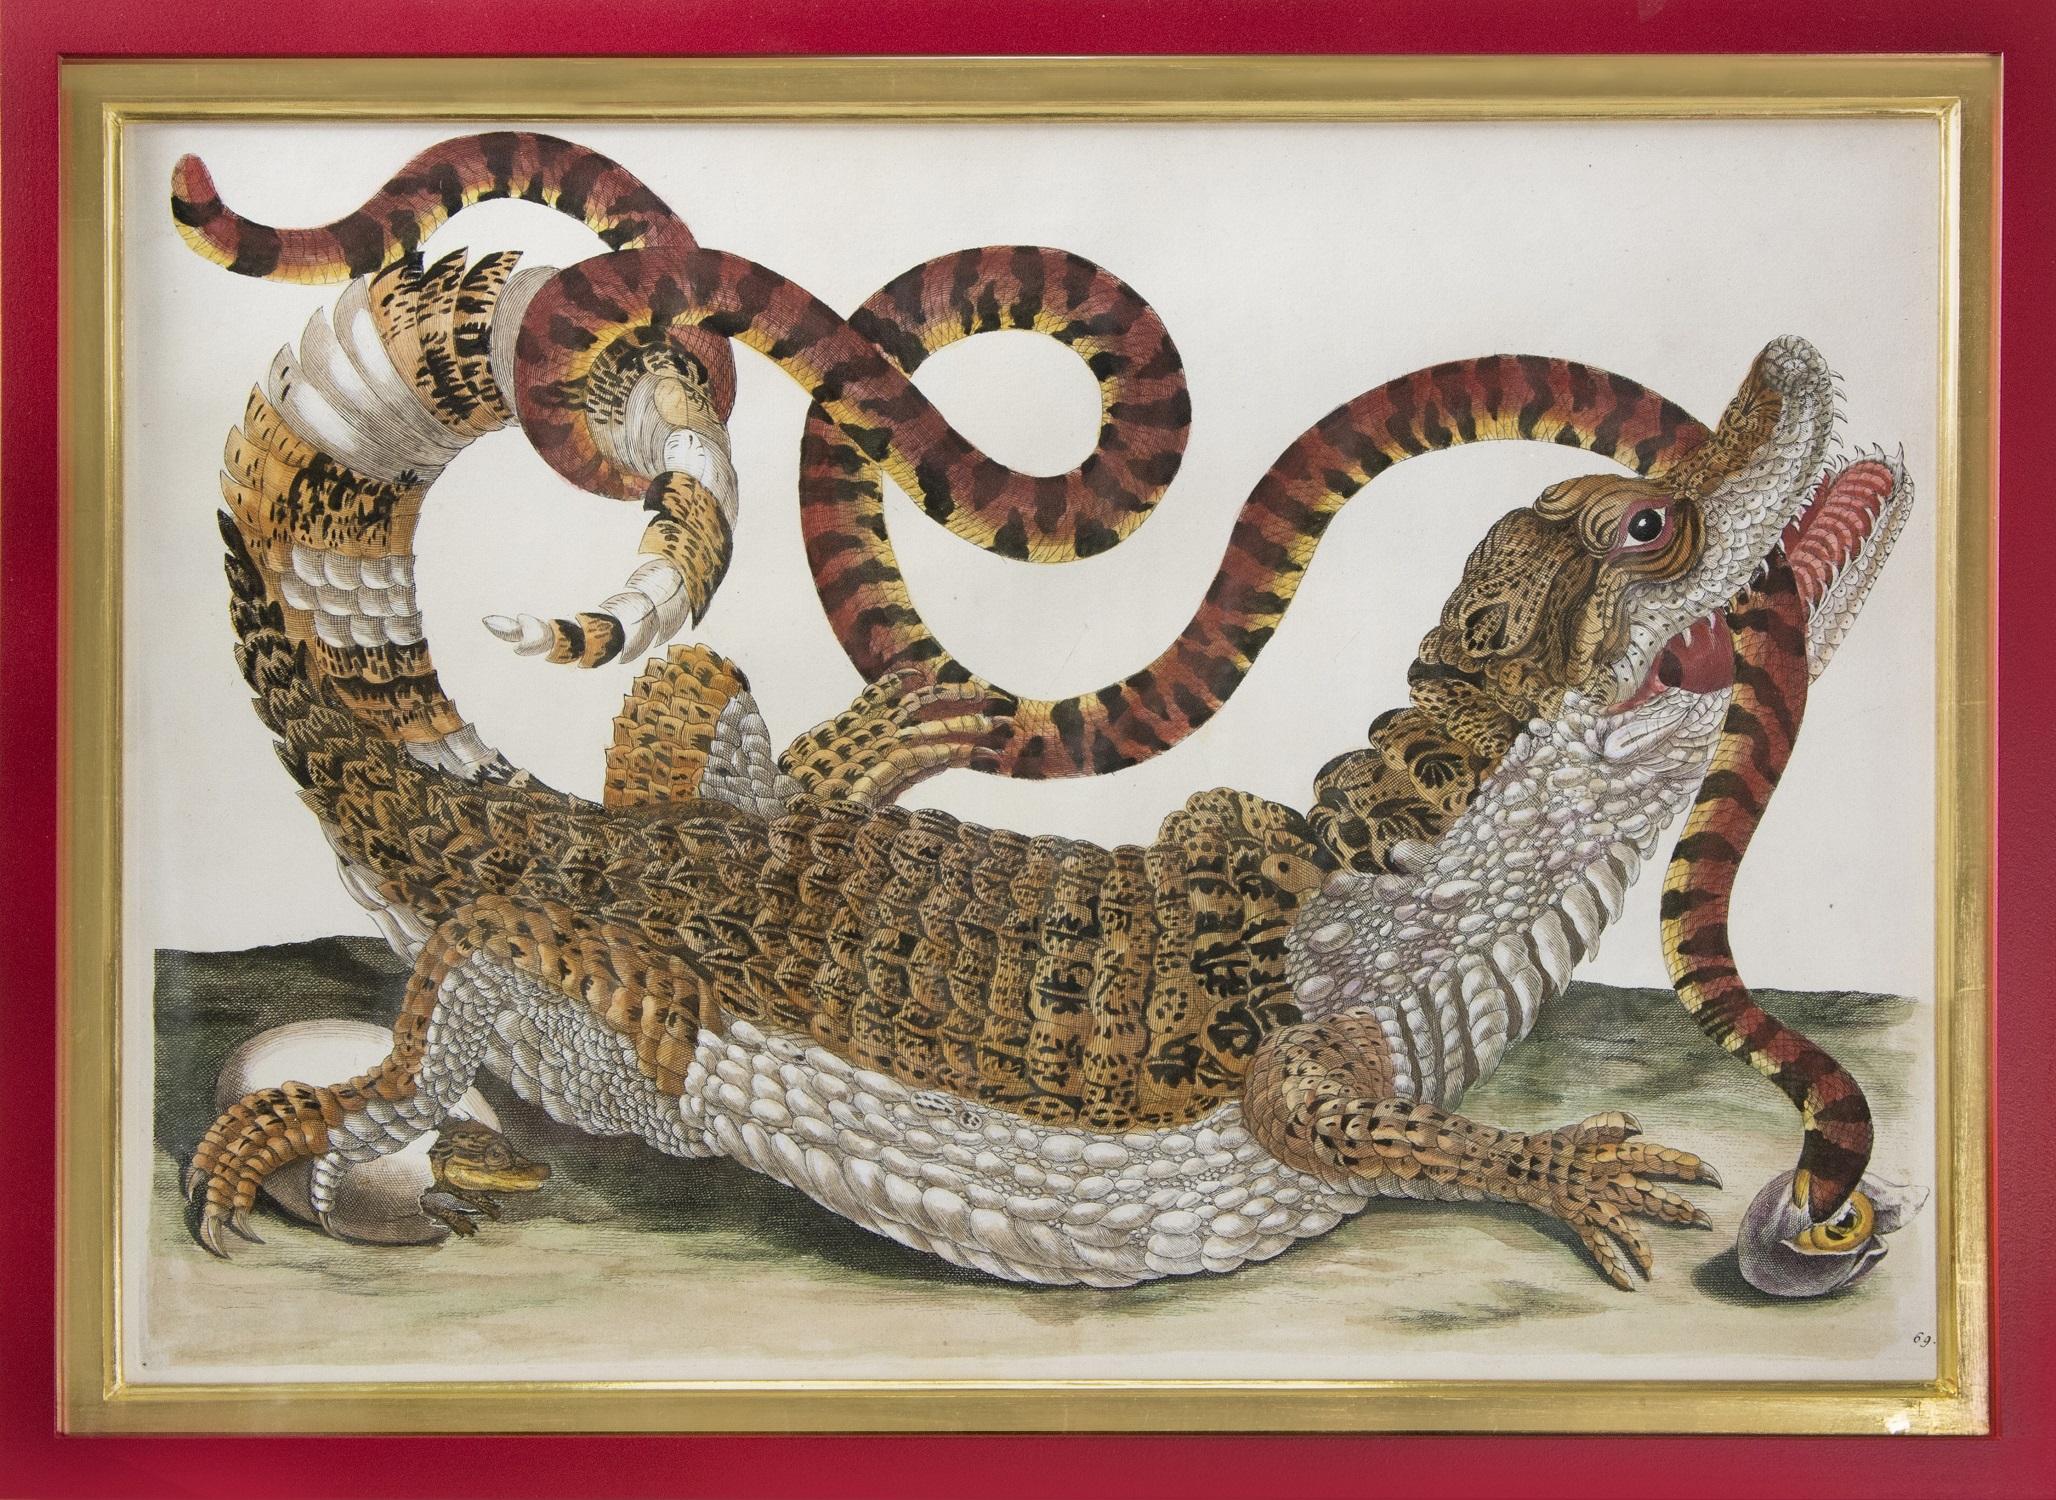 (After) Maria Sybilla Merian Animal Print - Alligator with Snake and a Lizard.  